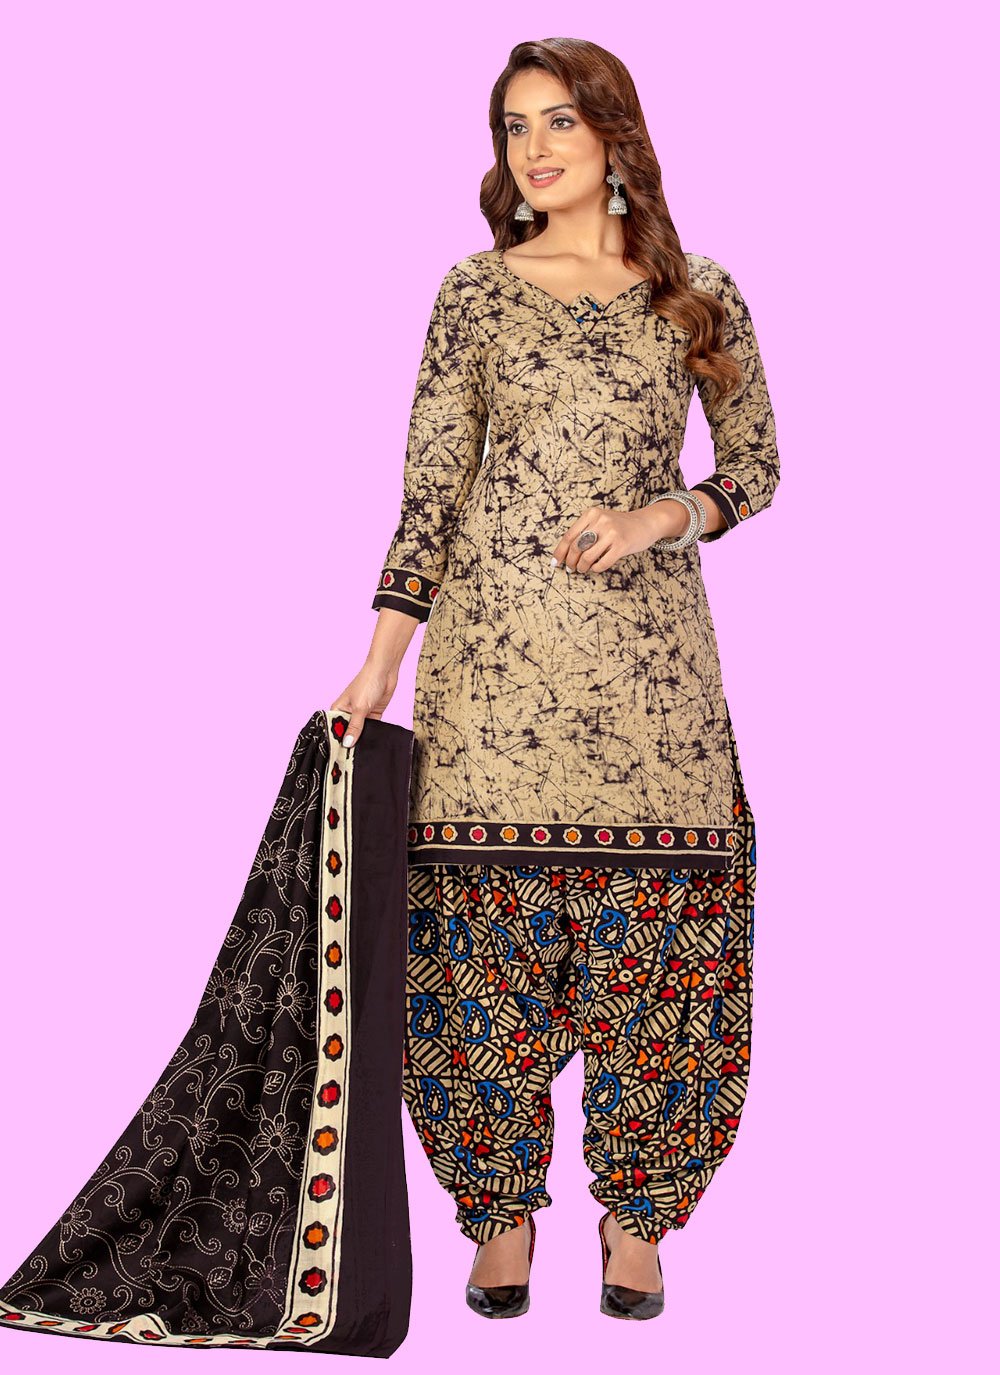 Gray and Red Printed Patiala Salwar Kameez Suit with Embroidery on Neck |  Exotic India Art